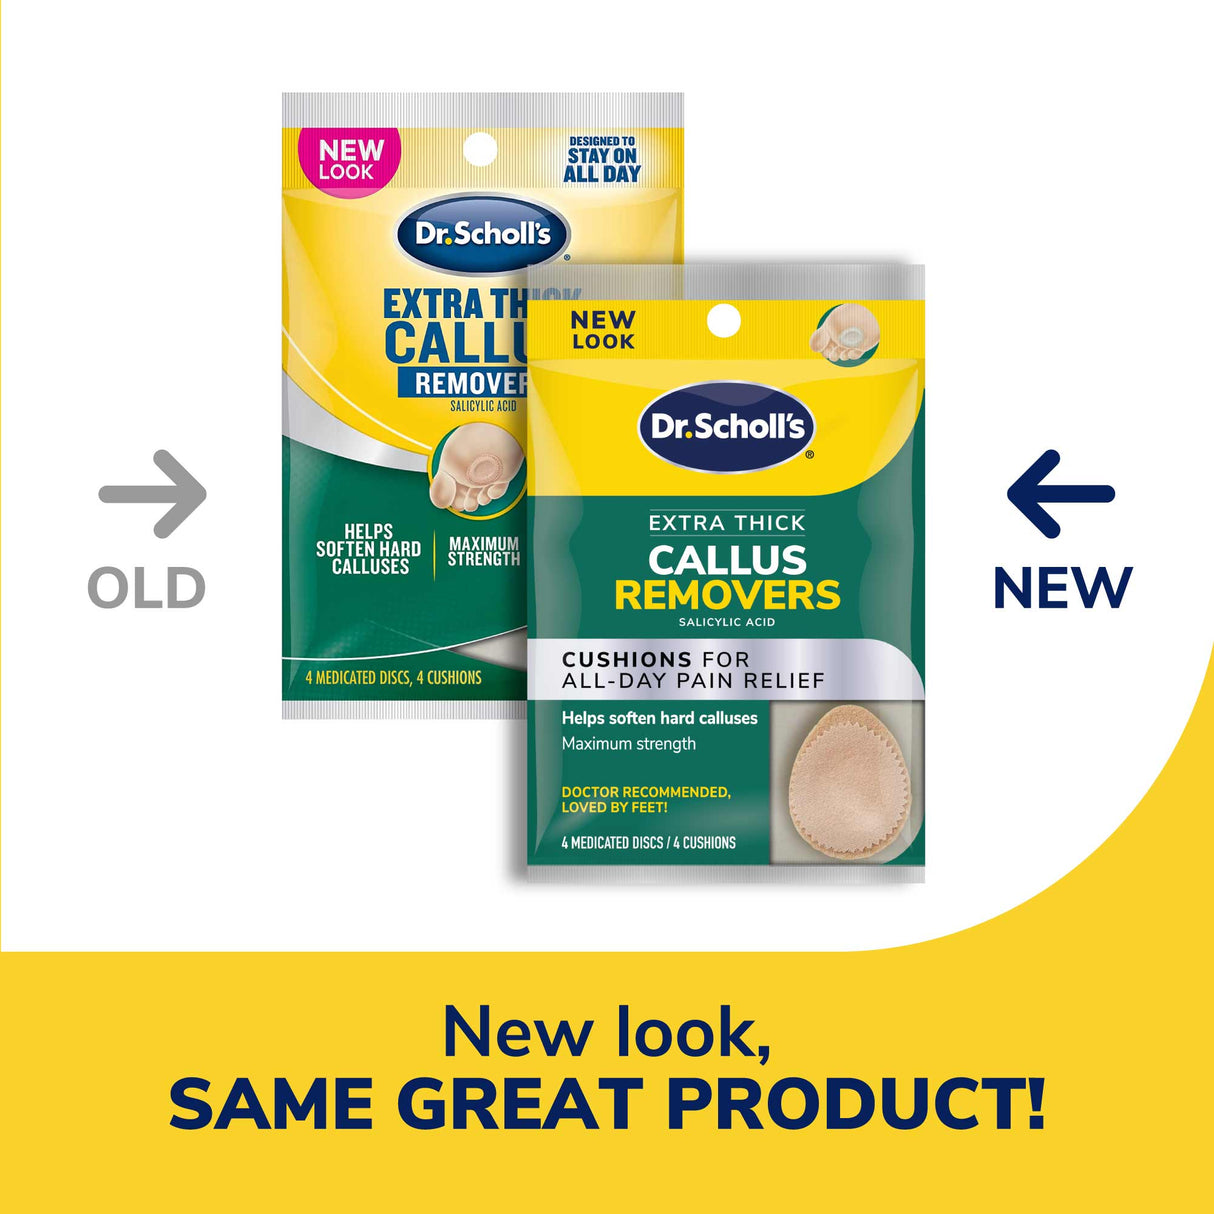 image of old packaging and new packaging of the extra thick callus removers